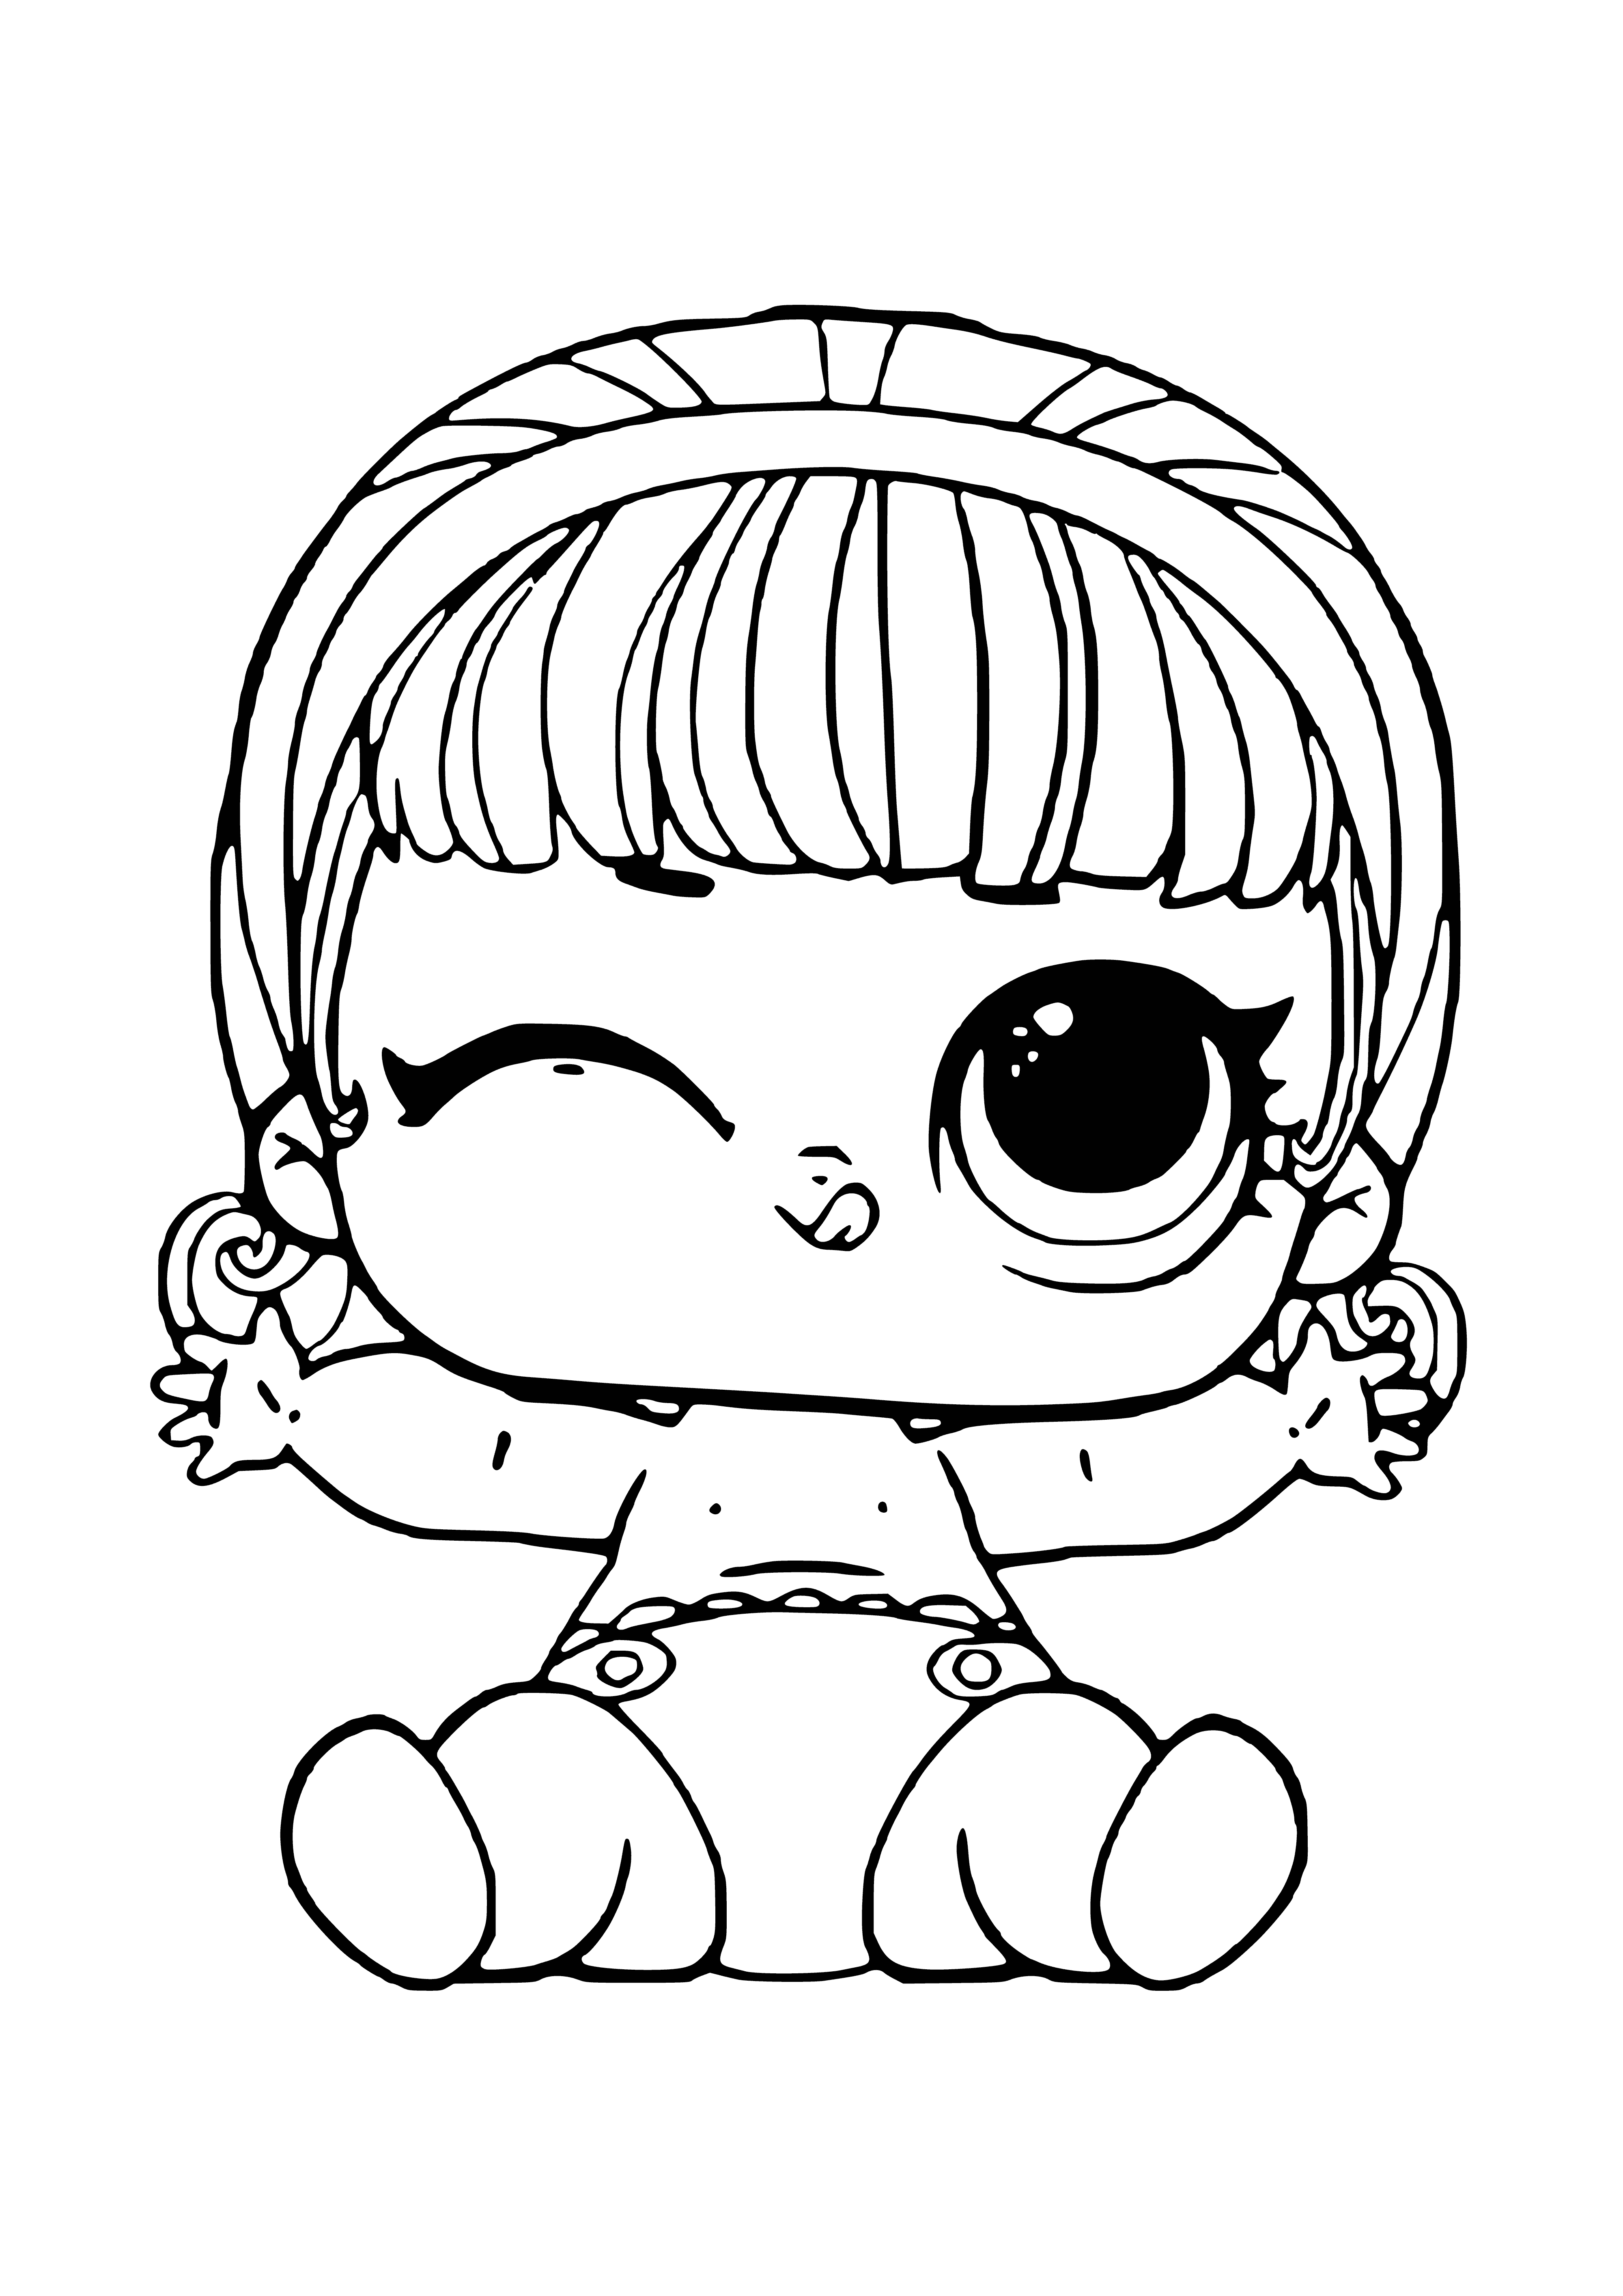 Lol lil madam queen coloring page